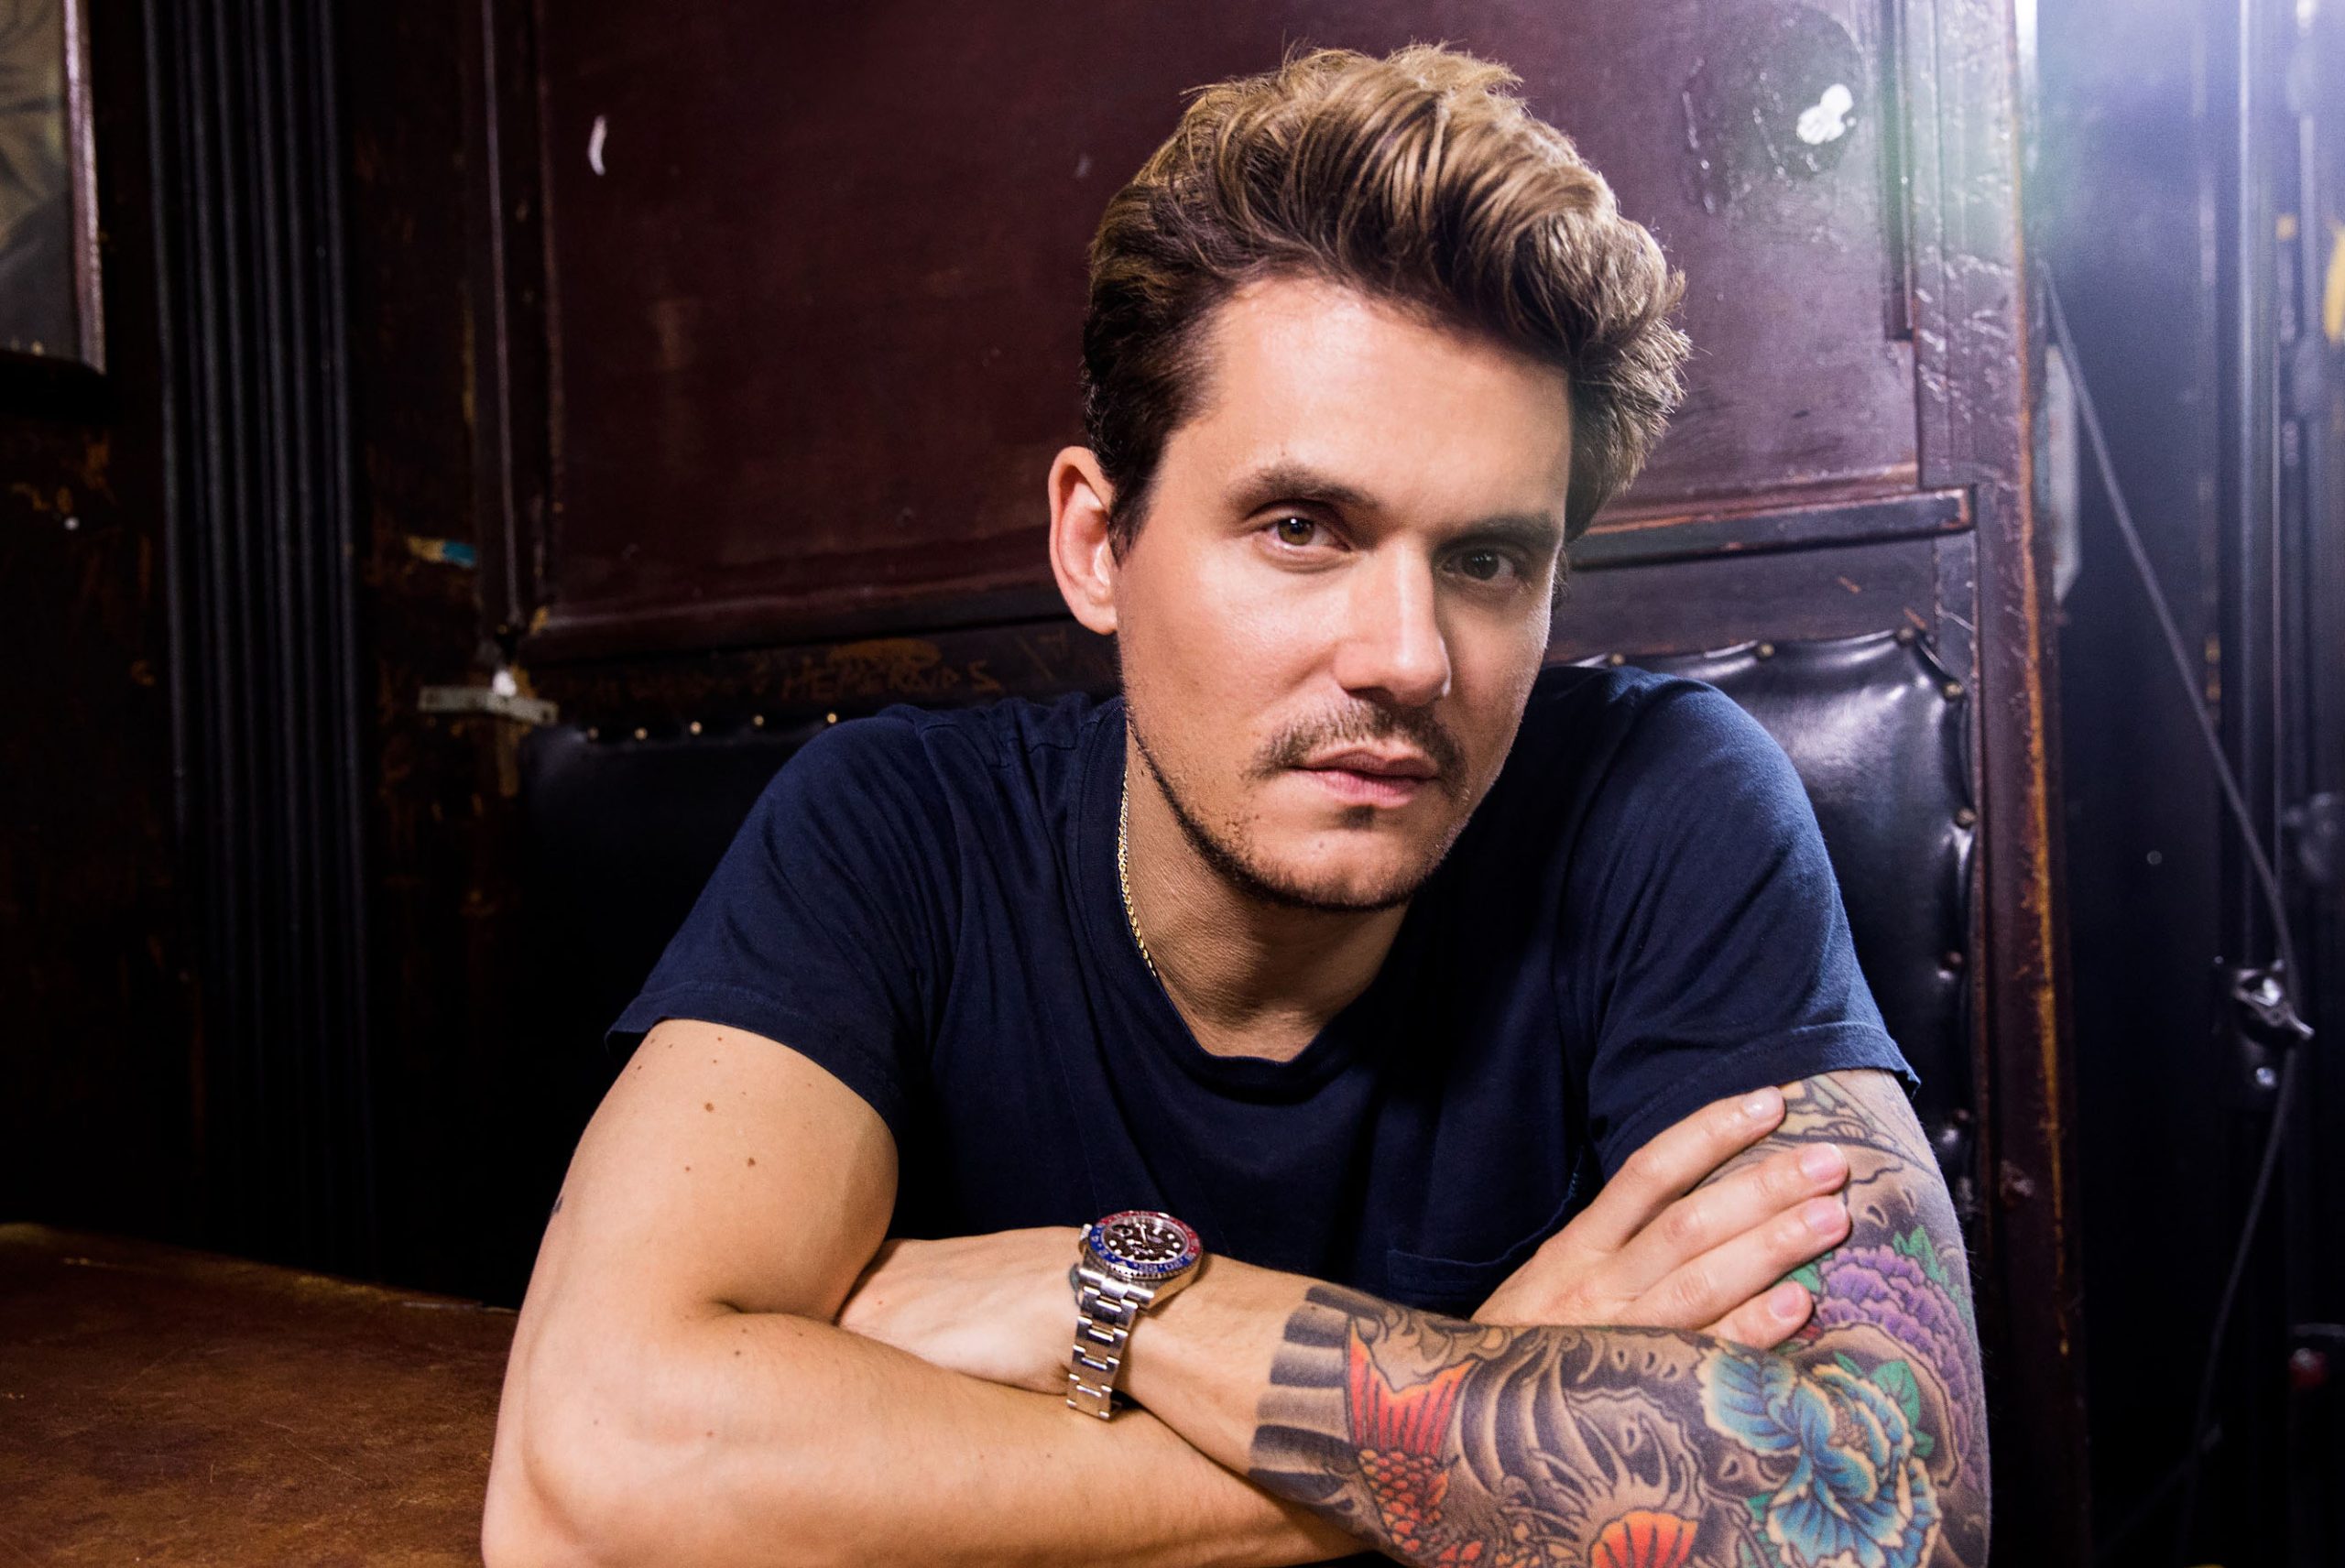 John Mayer will not perform in the Playing in the Sand Festival 2022 because of coronavirus